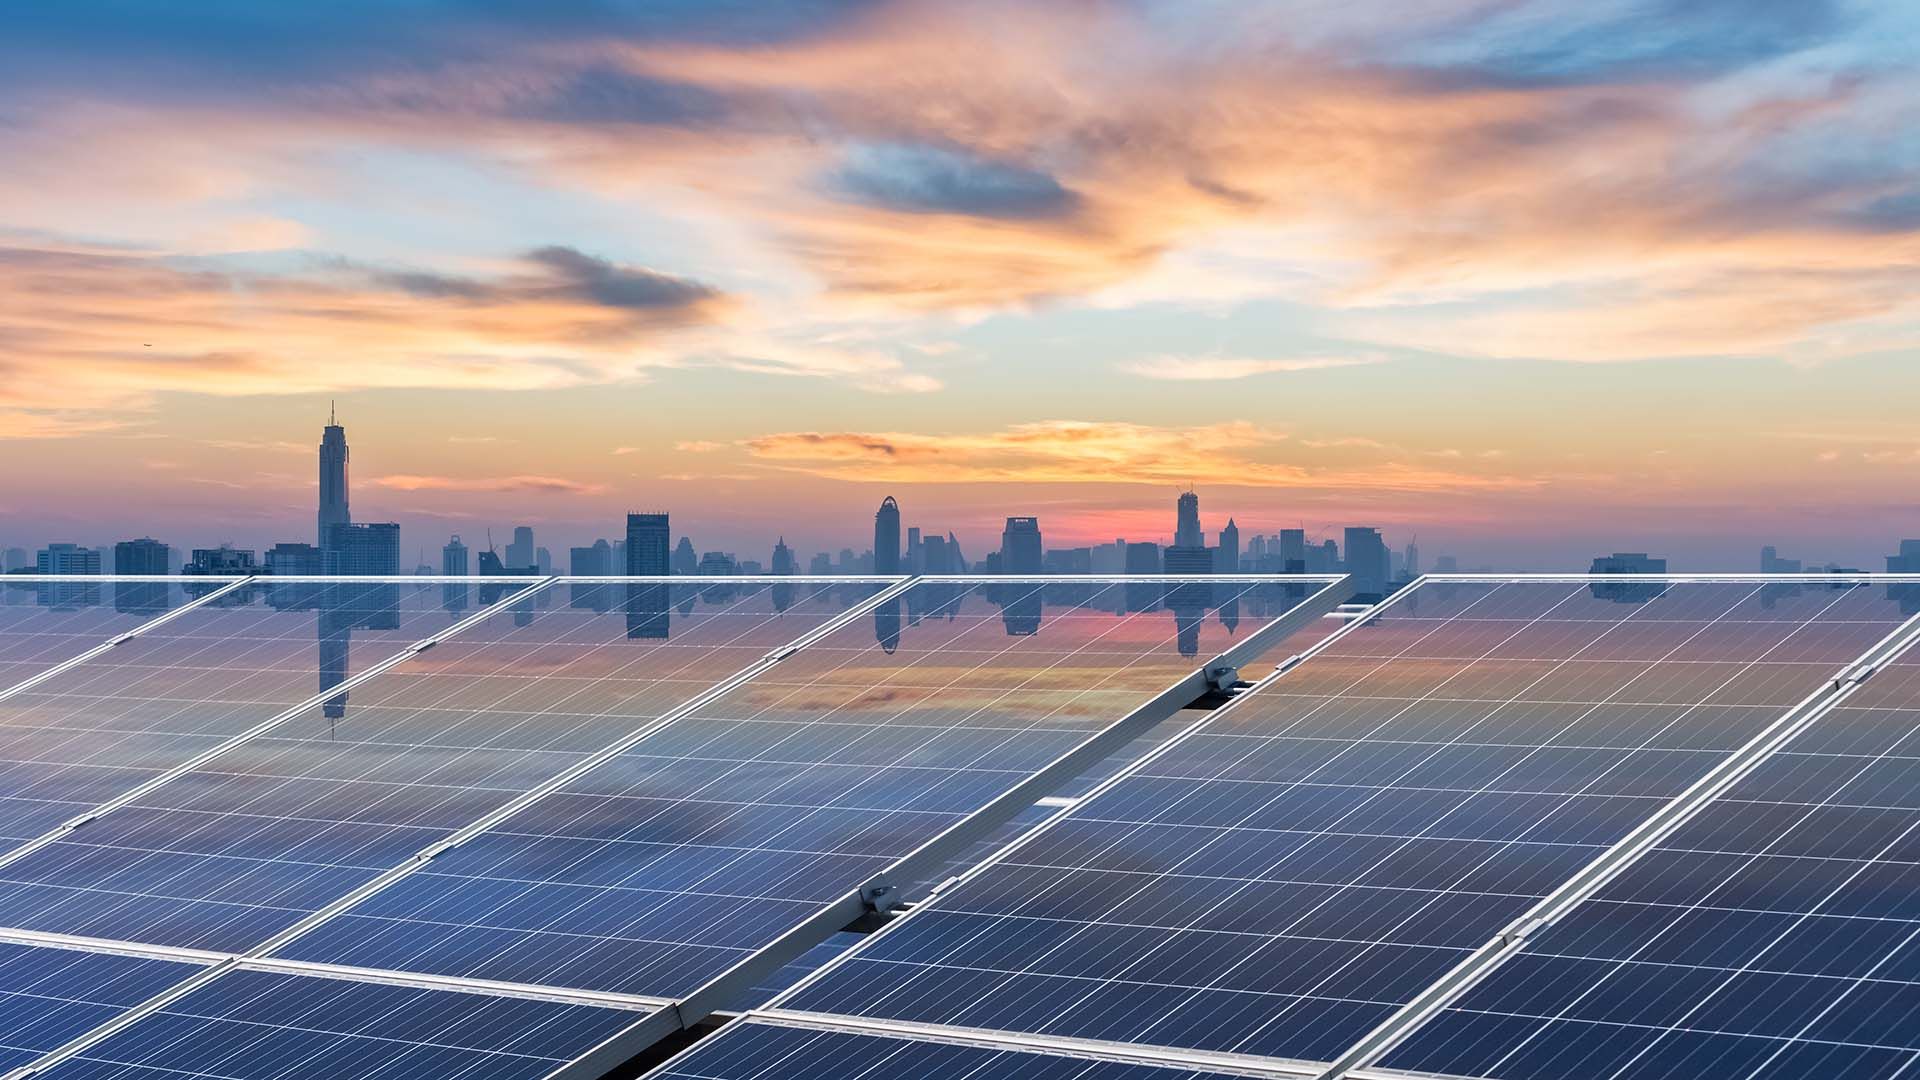 Solar panels with a city skyline background